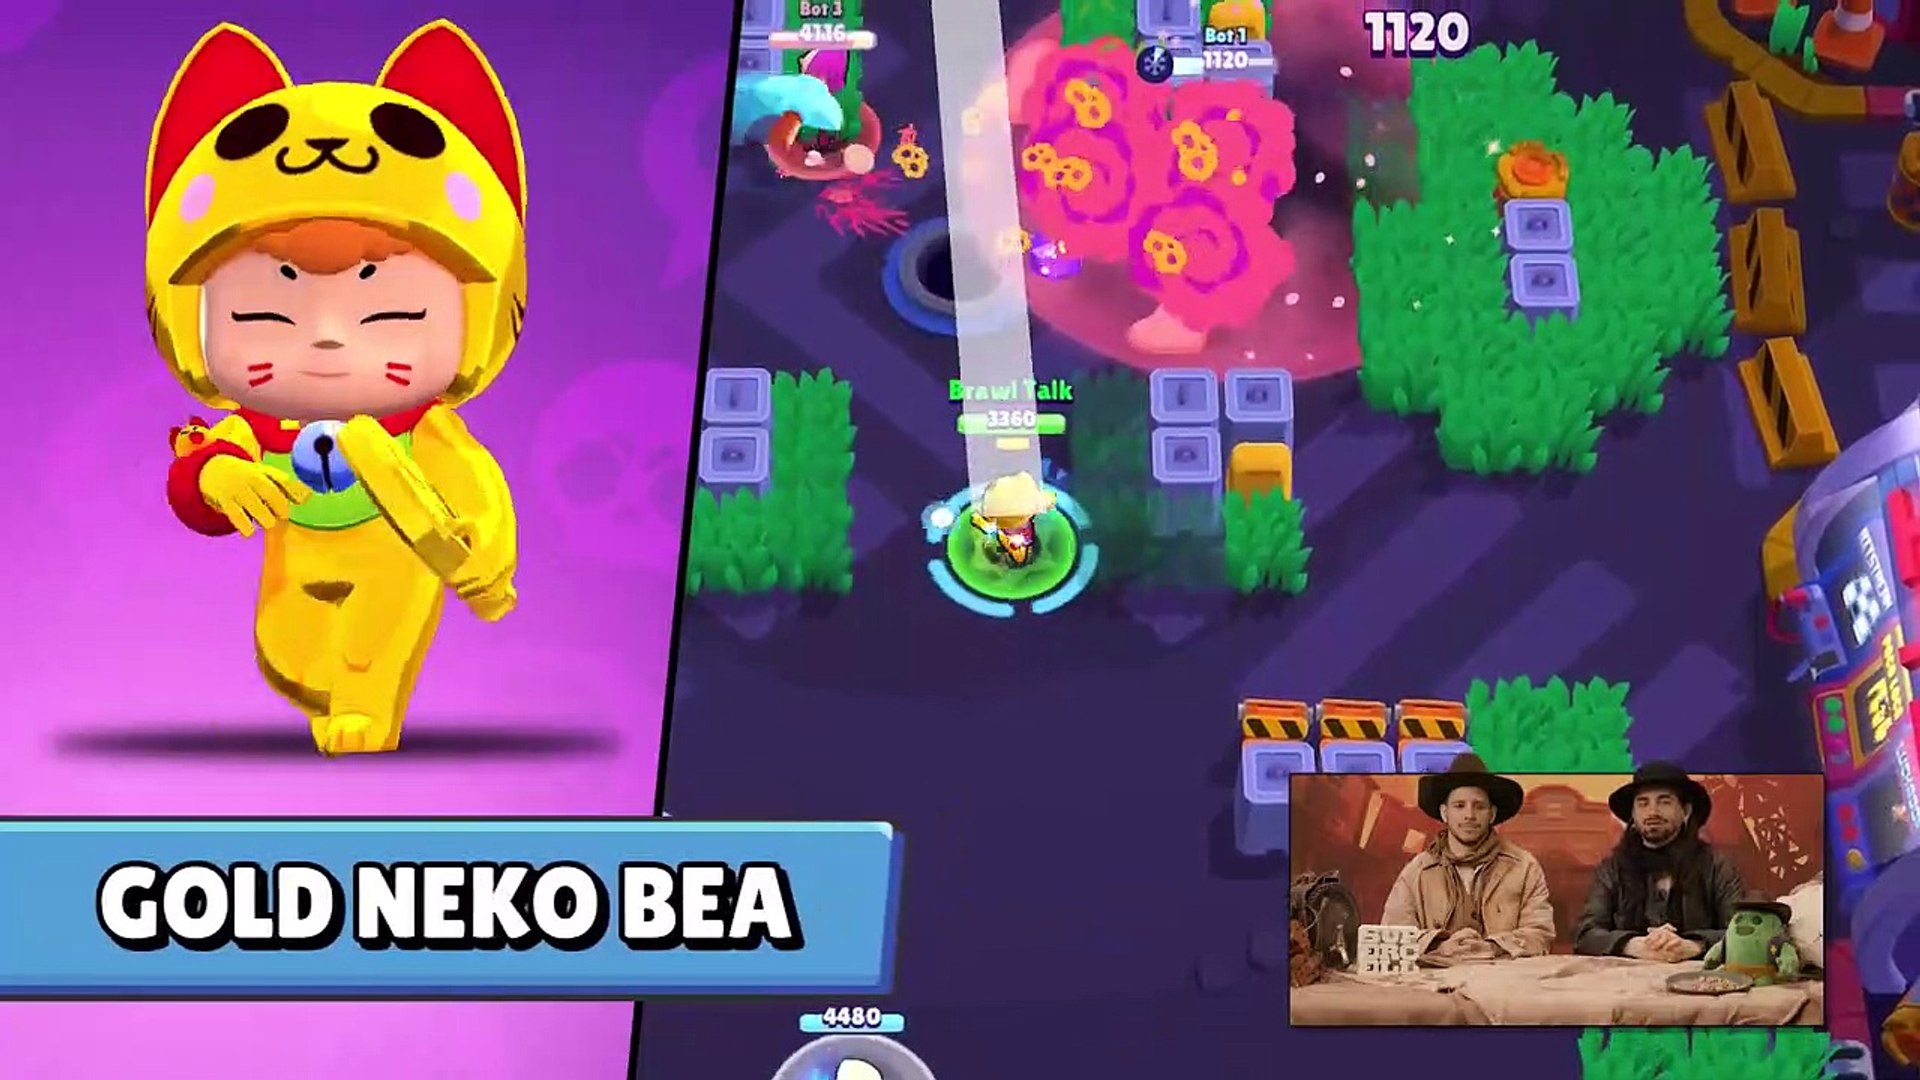 Brawl Stars Brawl Talk Two New Brawlers Tons Of Skins And A New Game Mode Video Dailymotion - brawl stars game unblocked